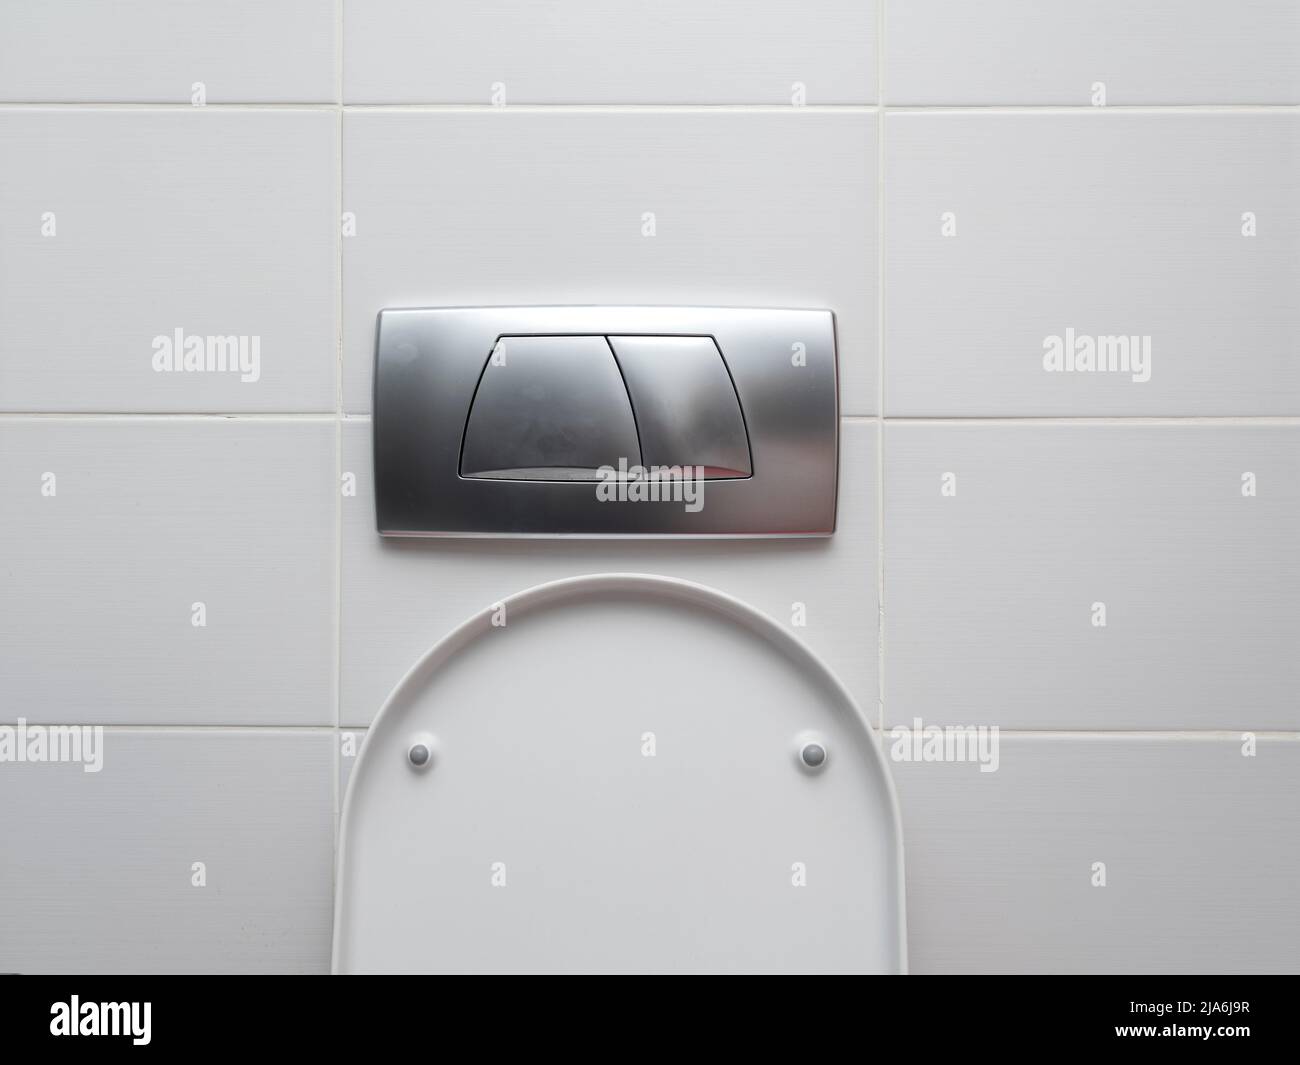 toilet seat cover background, front view Stock Photo